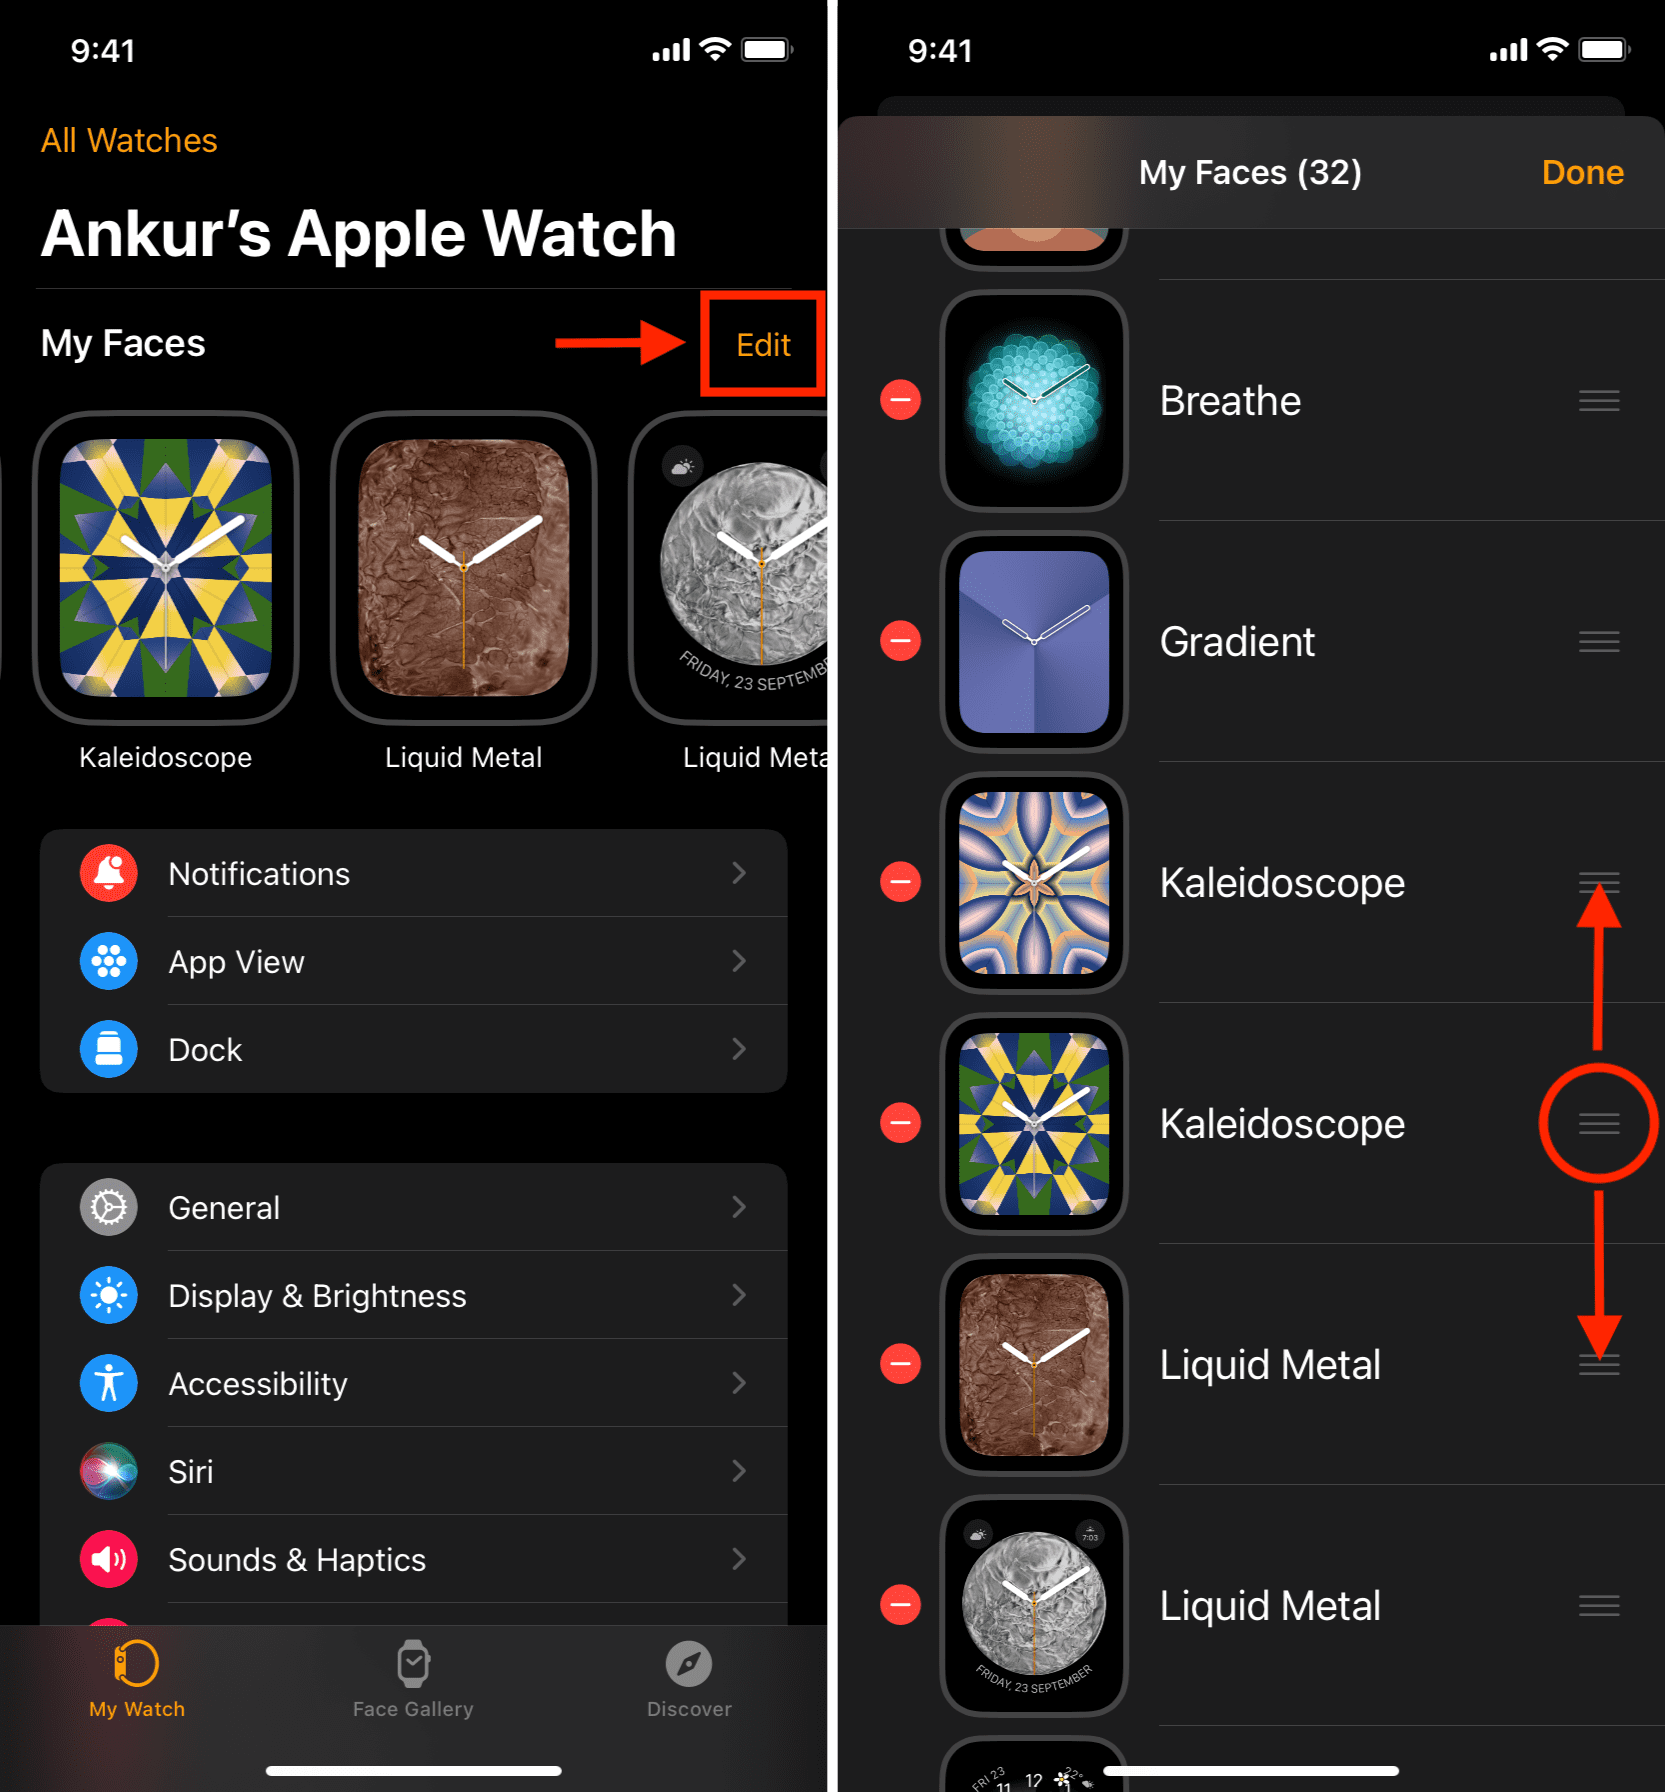 Change order of watch faces using iPhone